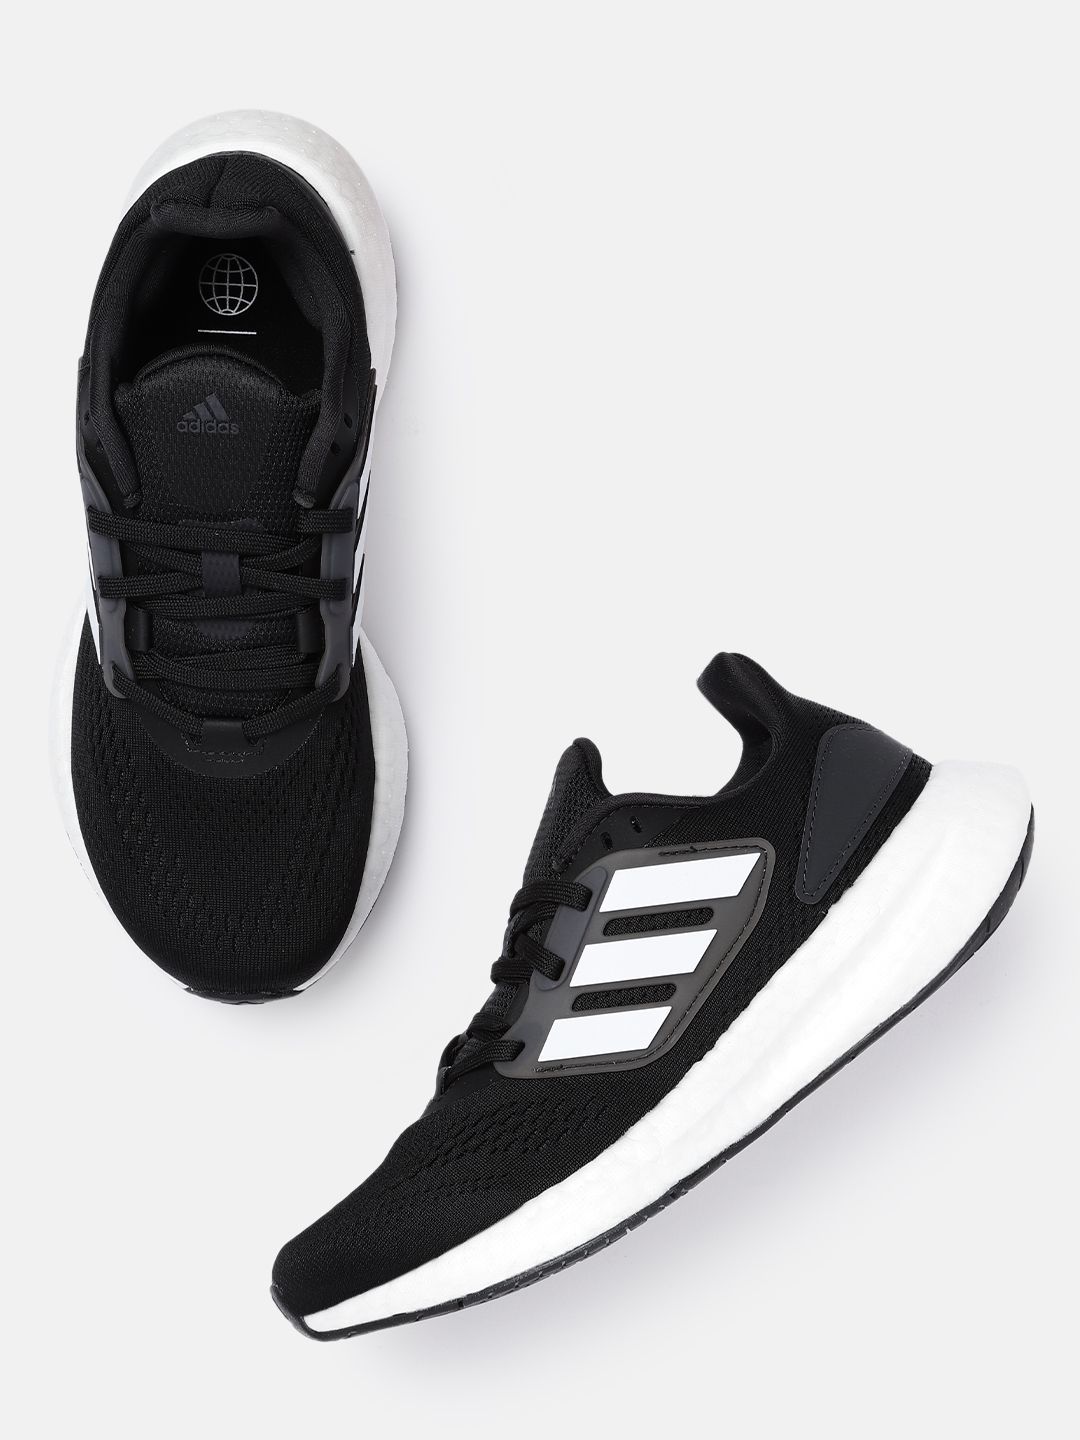 ADIDAS Women Black Solid Woven Design Pureboost 22 Running Shoes Price in India